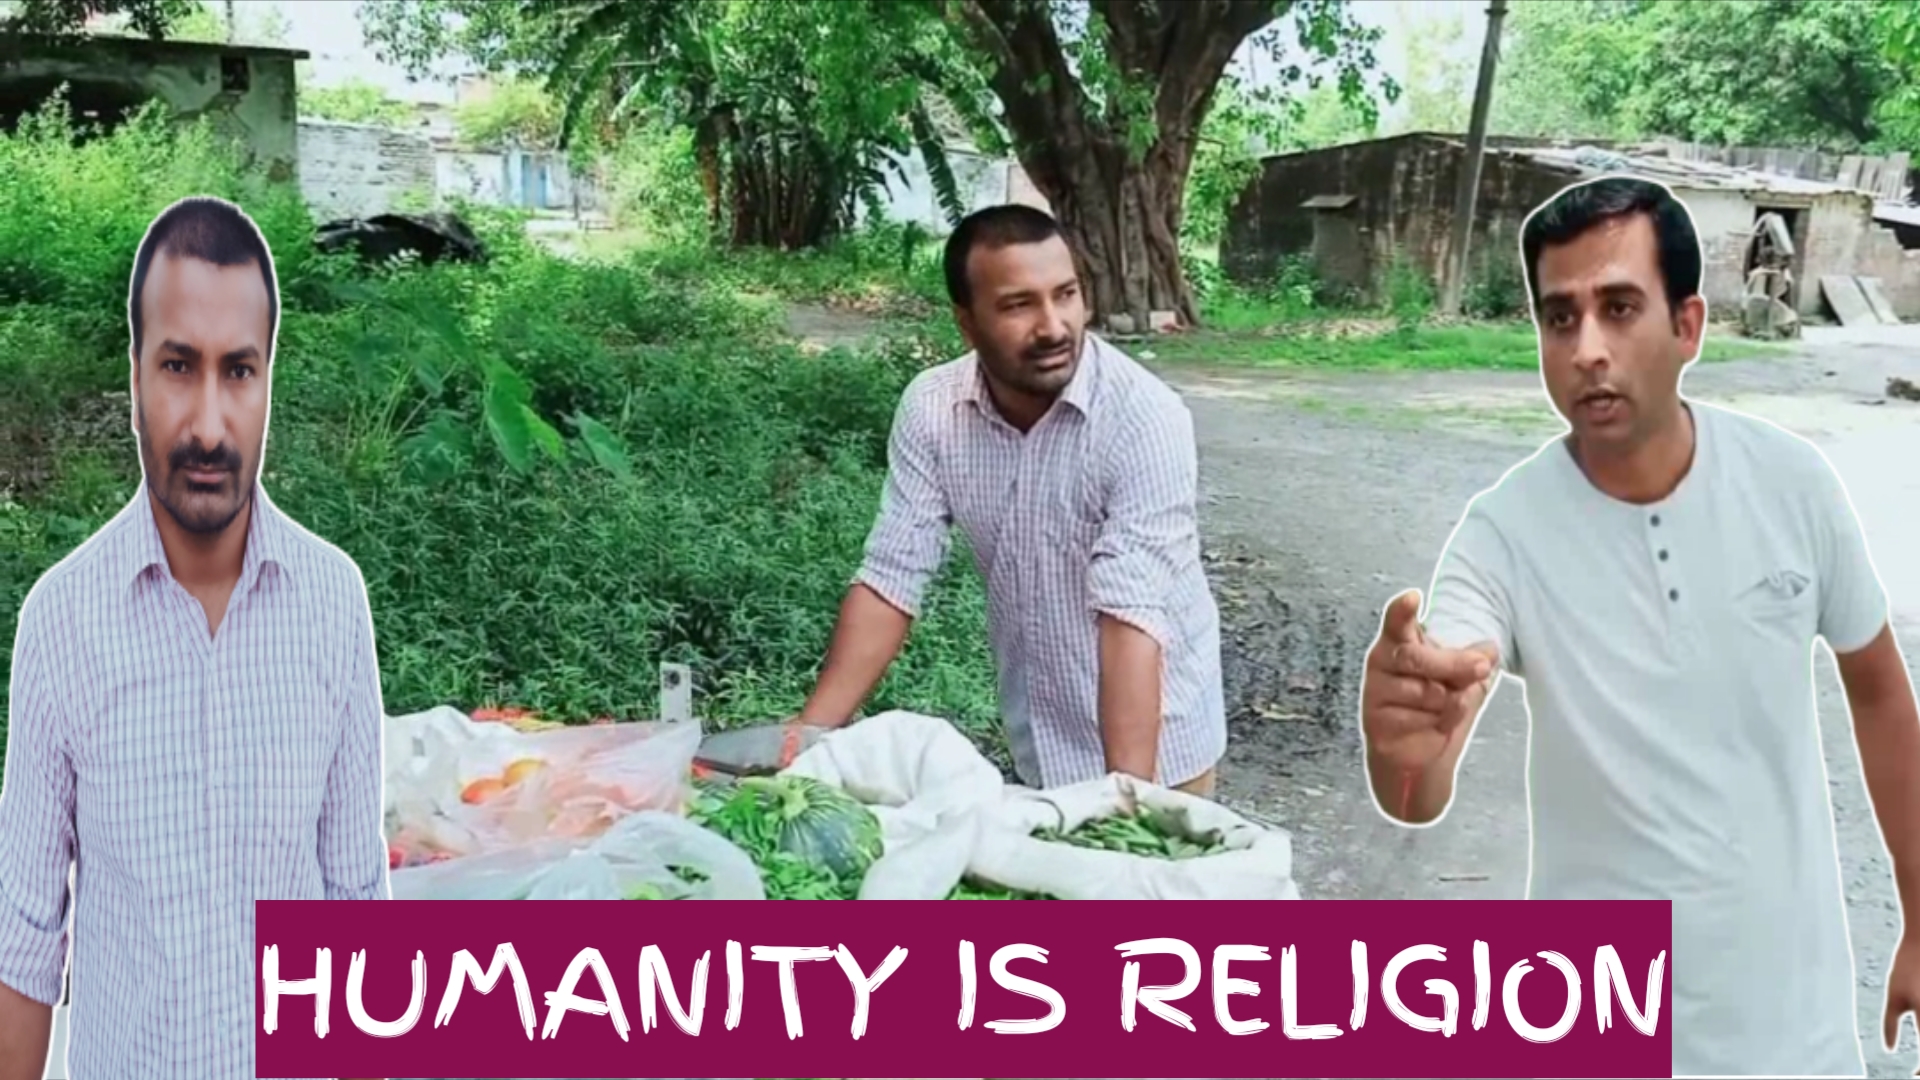 Humanity is religion